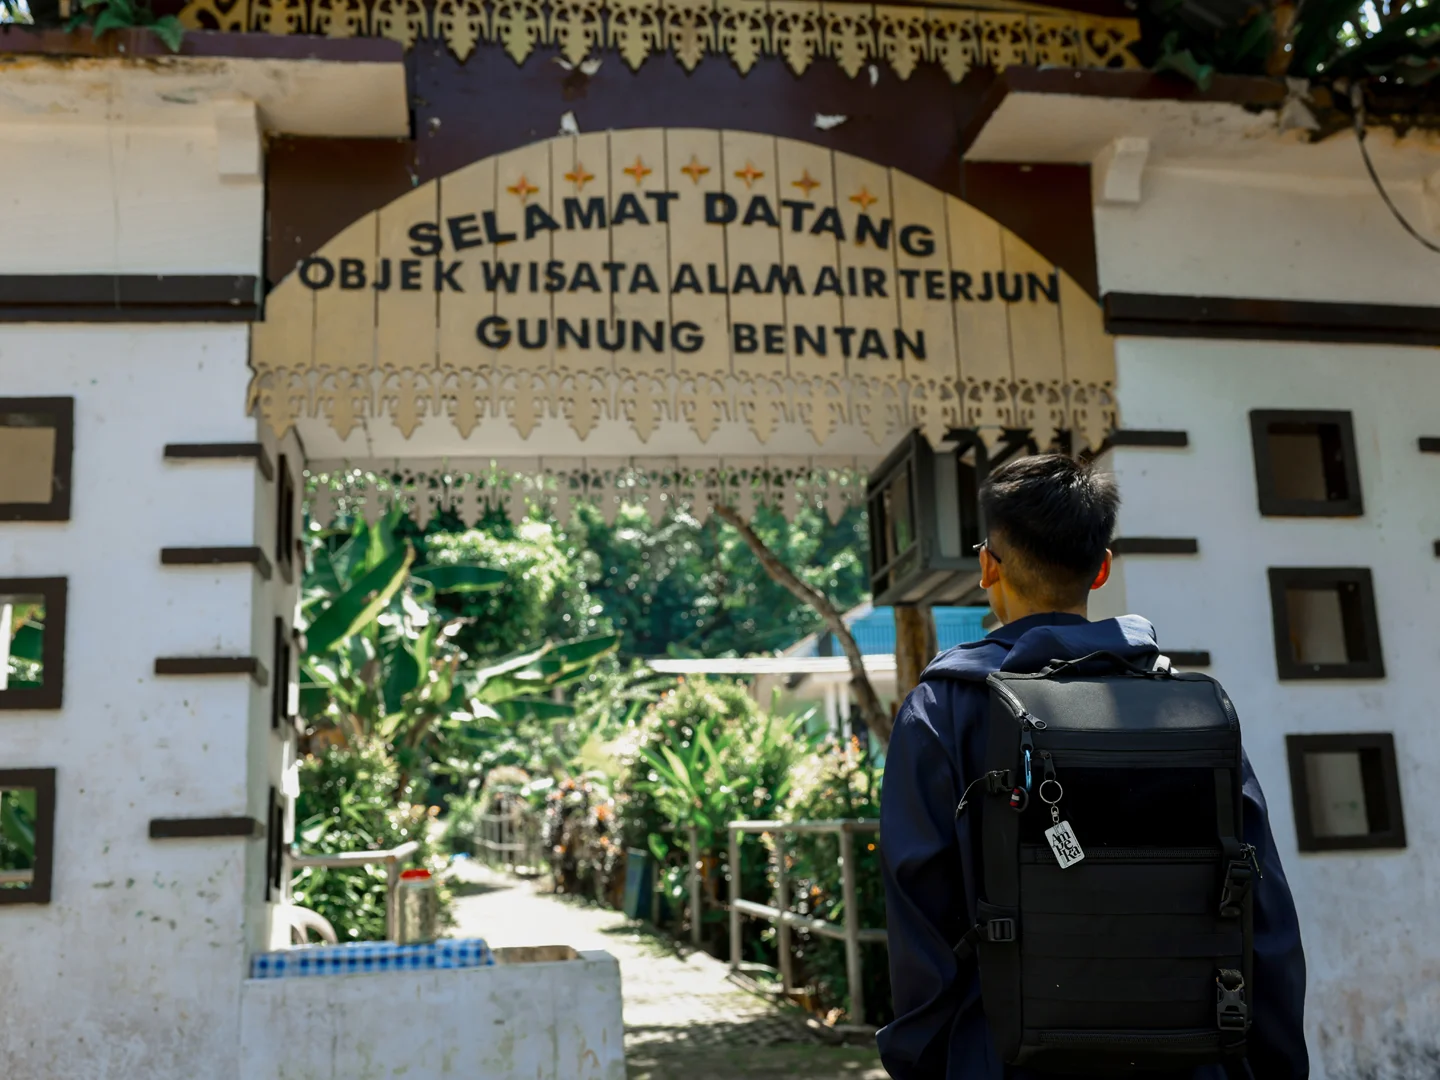 Mount bintan entrance with a person standing